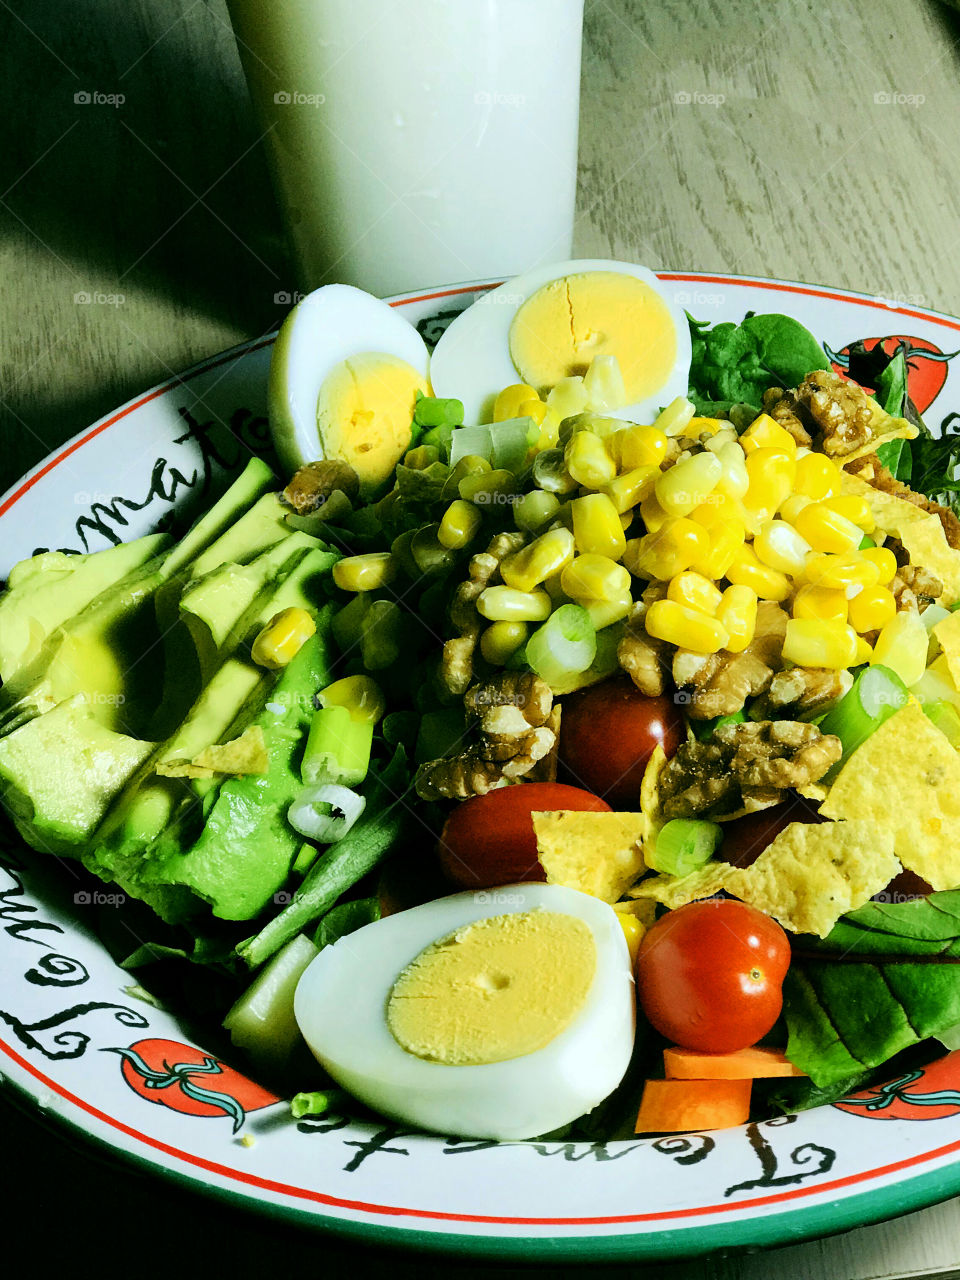 My version of a Cobb salad; mixed greens, leftover Easter eggs, corn, avocado, chicken, grape tomatoes, sliced carrots, green onions, walnuts, crumbled corn chips.  And a glass of milk. Yum! 